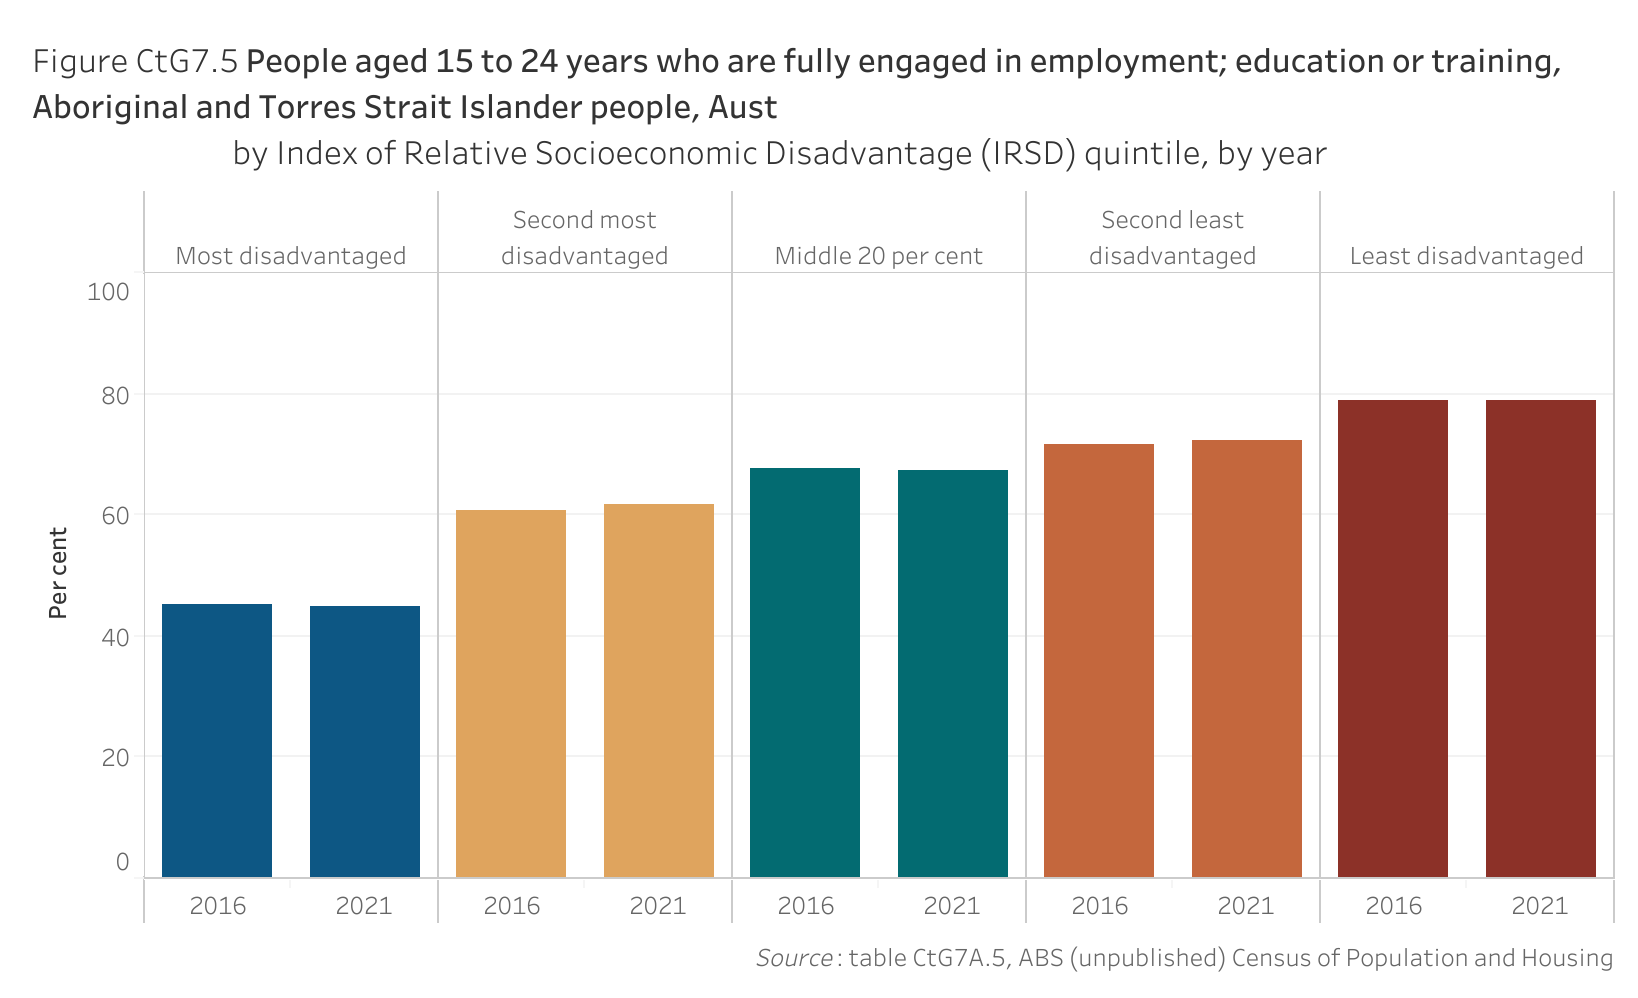 Figure CtG7.5 shows people aged 15 to 24 years who are fully engaged in employment; education or training, Aboriginal and Torres Strait Islander people, Australia, by Index of Relative Socioeconomic Disadvantage quintile, by year. More details can be found within the text near this image.